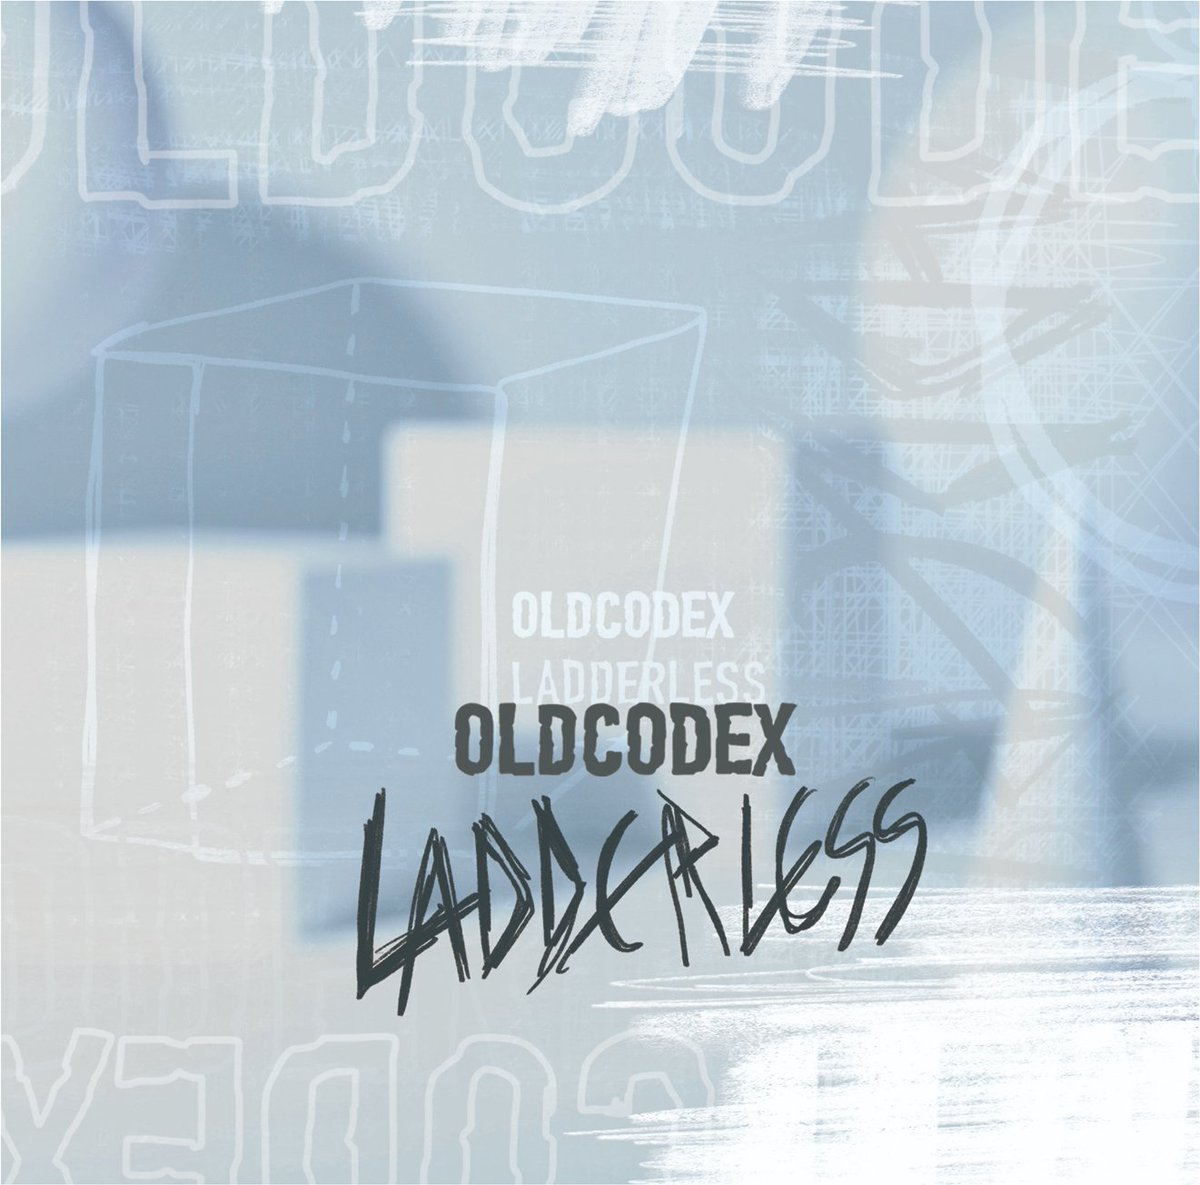 Cover art for『OLDCODEX - Selector』from the release『LADDERLESS』